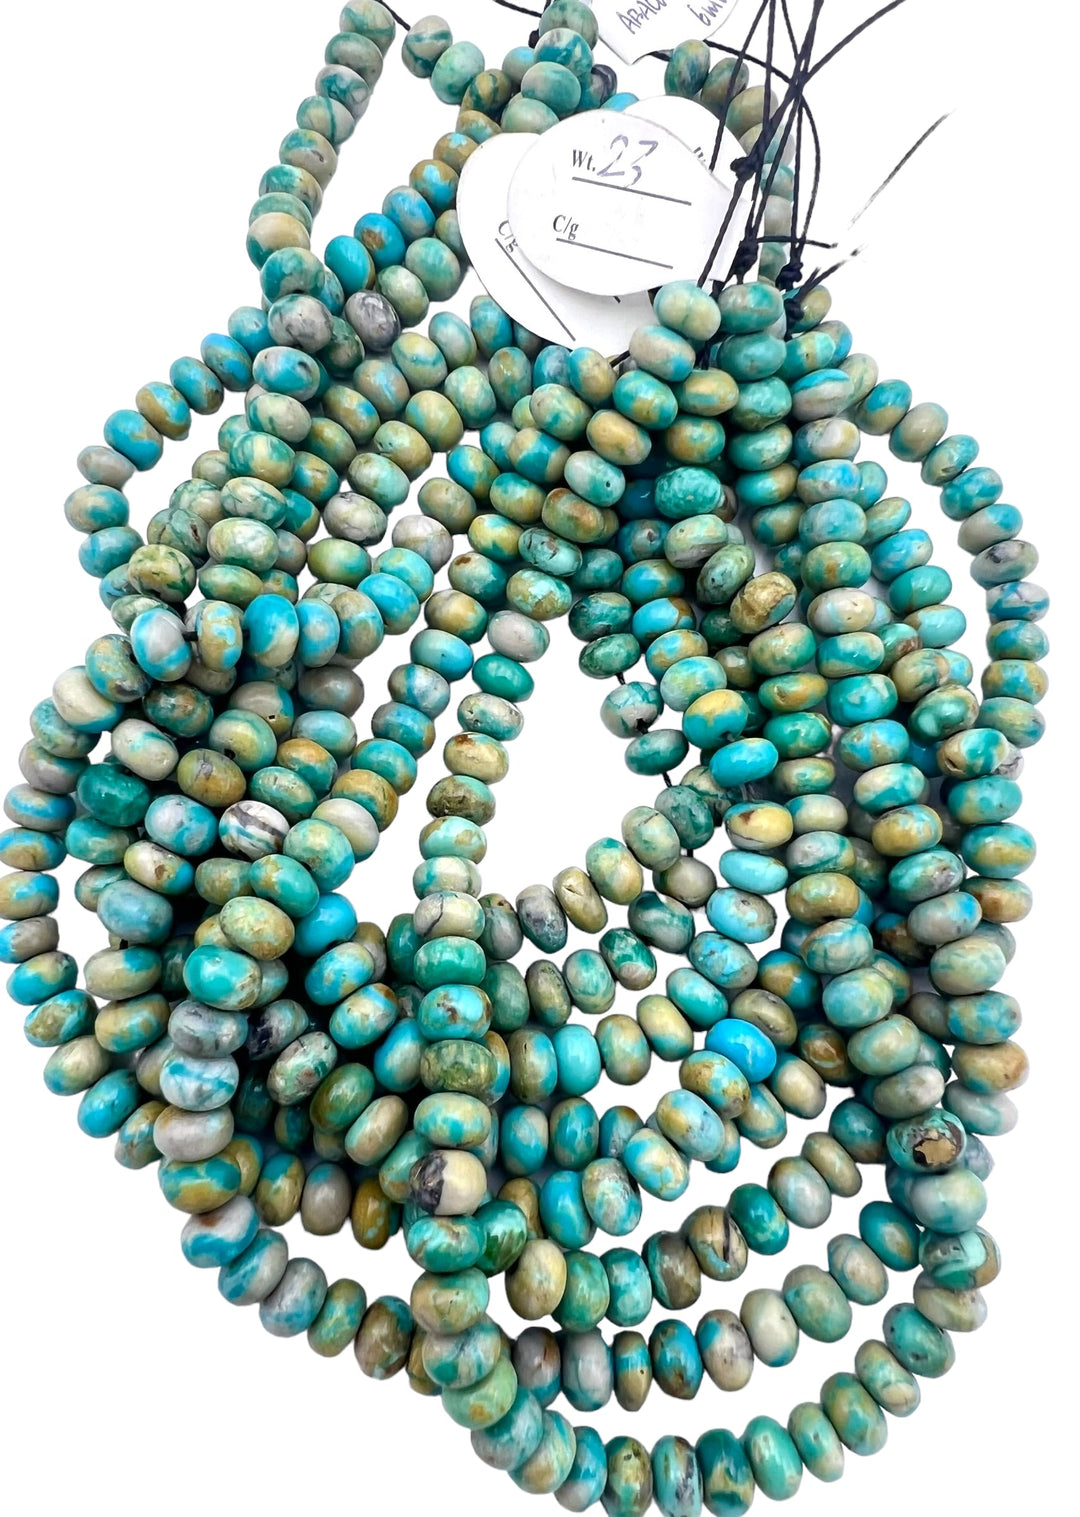 RARE Nevada Fox Turquoise 6mm Rondelle Beads 9 inch strand –